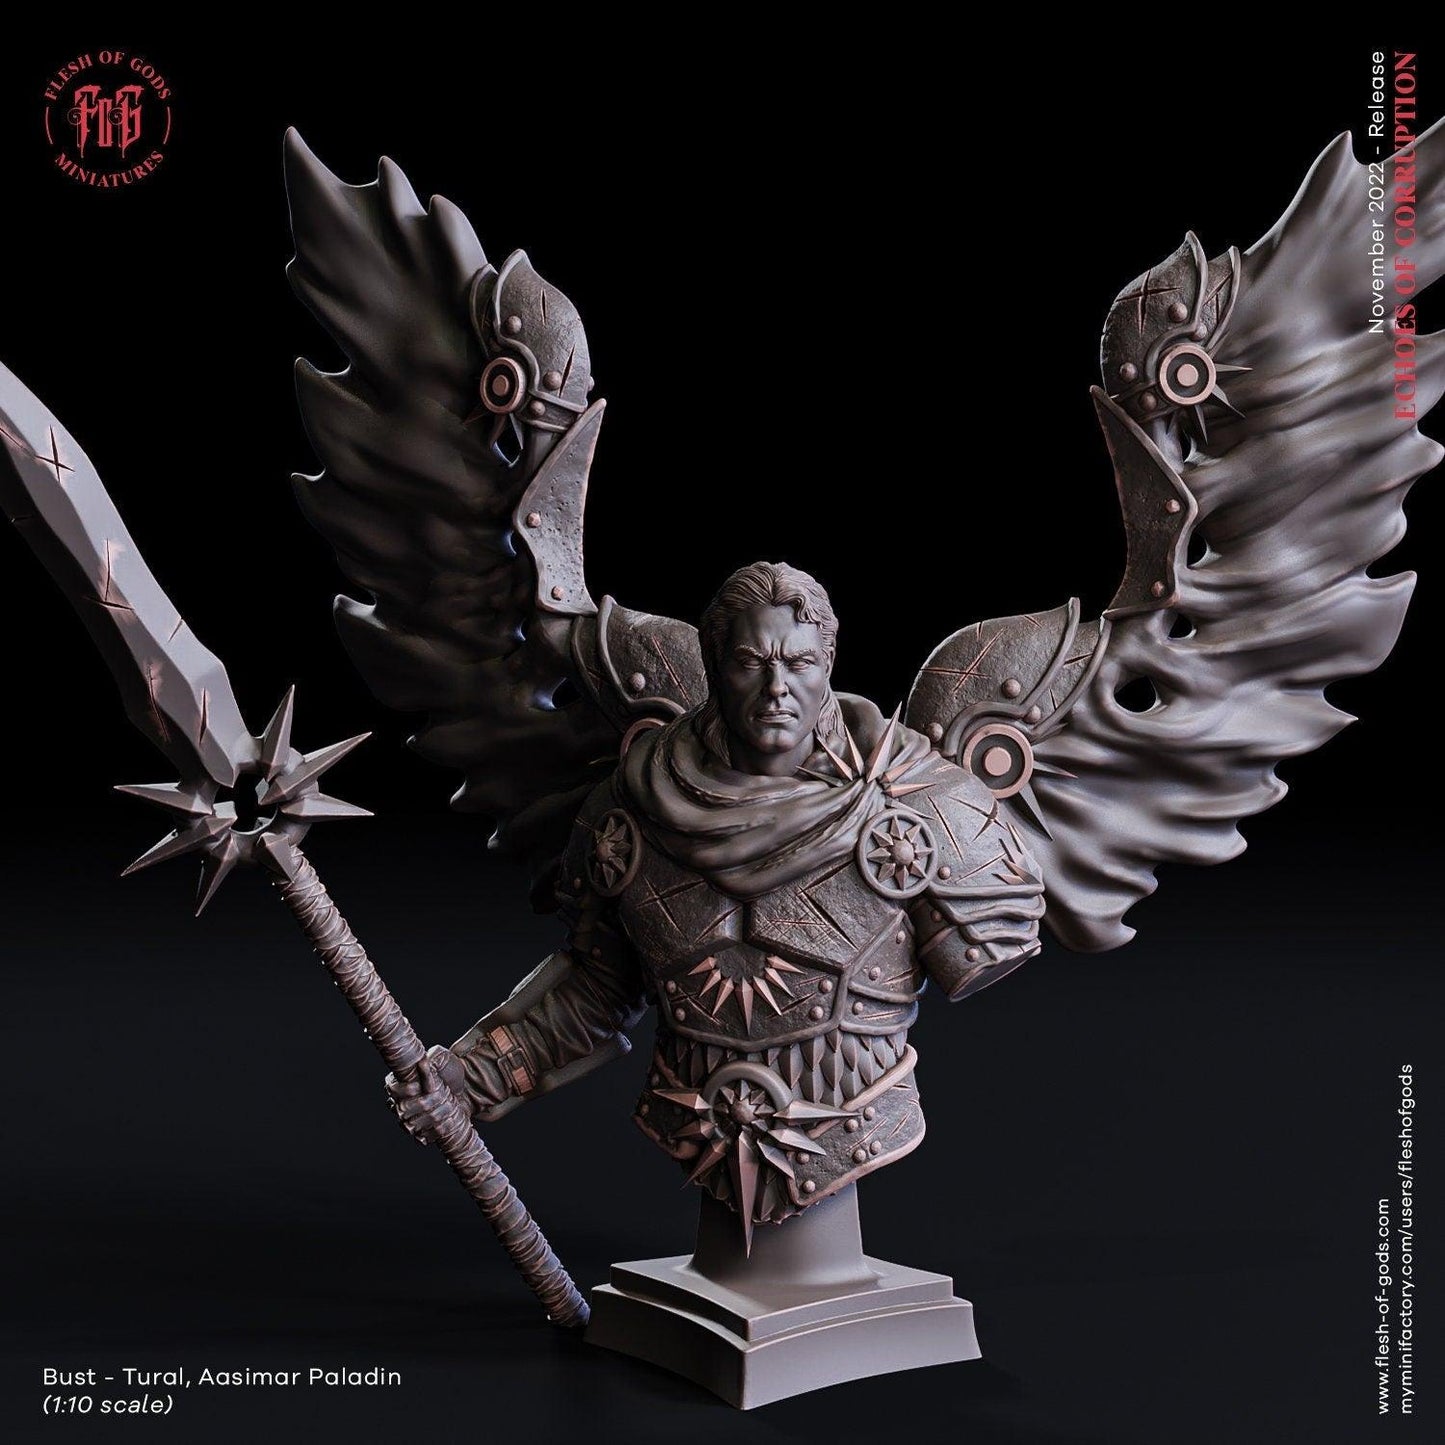 Aasimar Paladin Bust Statue DnD Paladin | 25mm Base 32mm scale DnD Miniature Dungeons and Dragons DnD 5e class Fighter Aasimar Miniature - Plague Miniatures